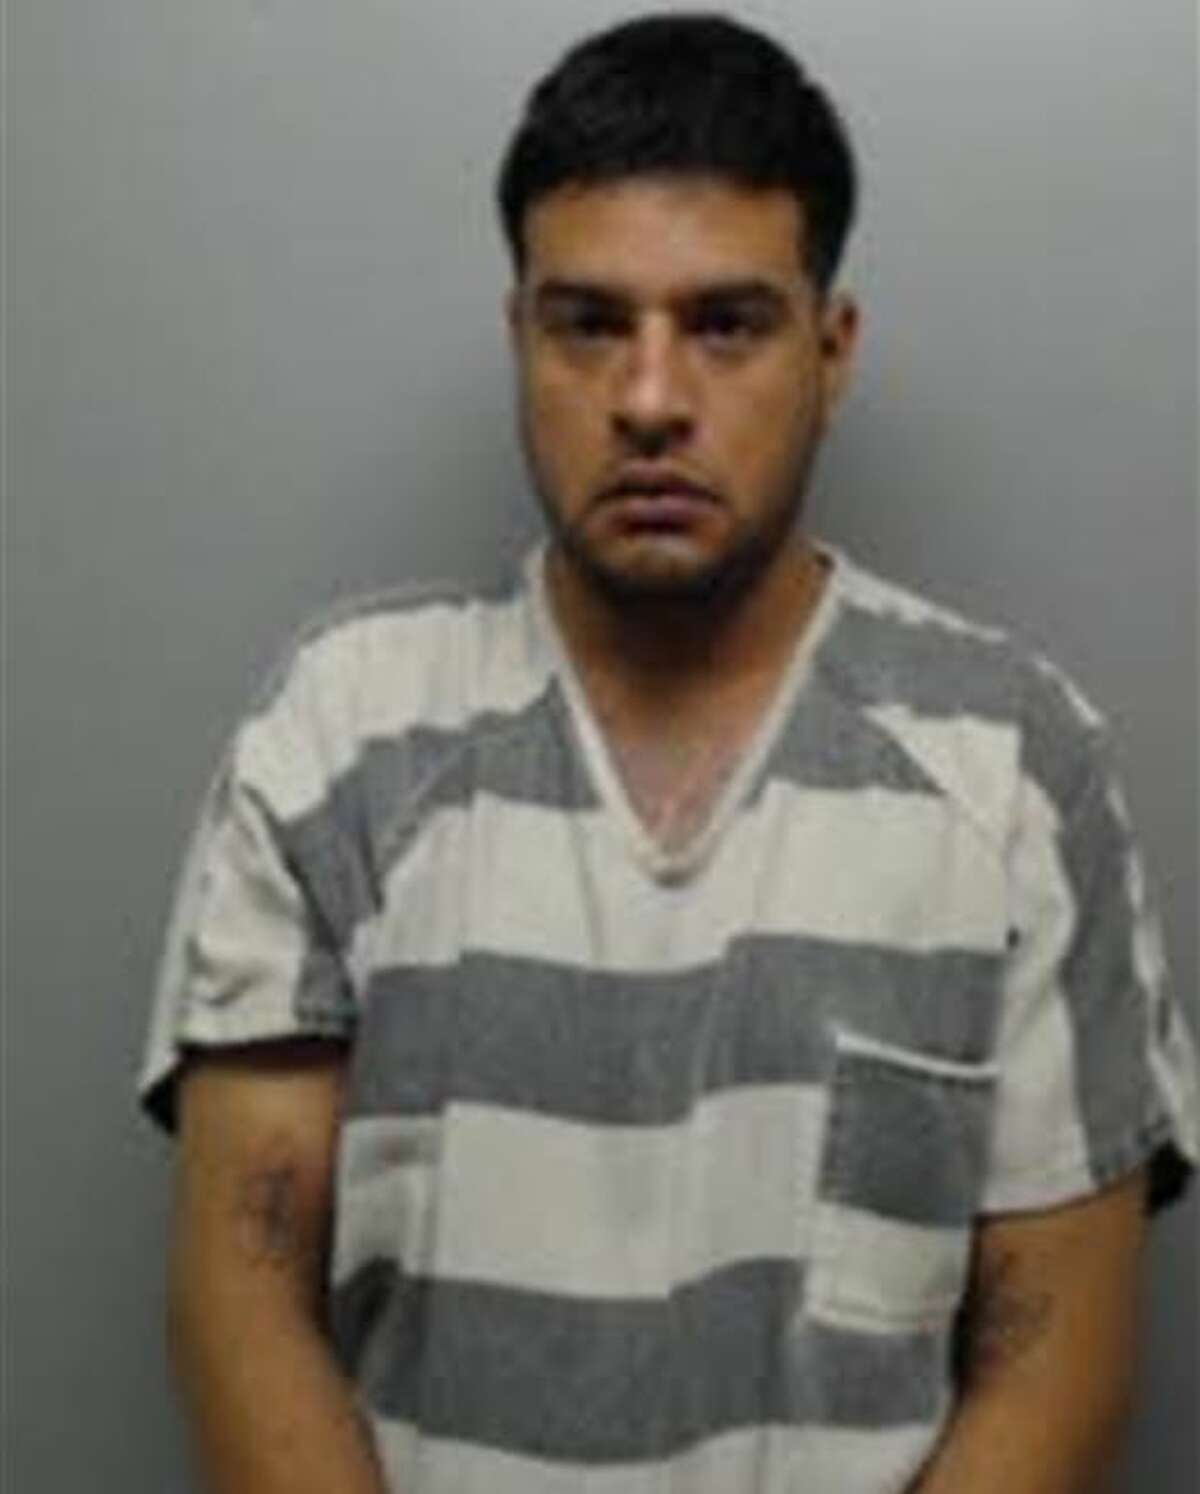 Javier Cavazos, 25, was charged July 8 with aggravated assault of date, family, household member.